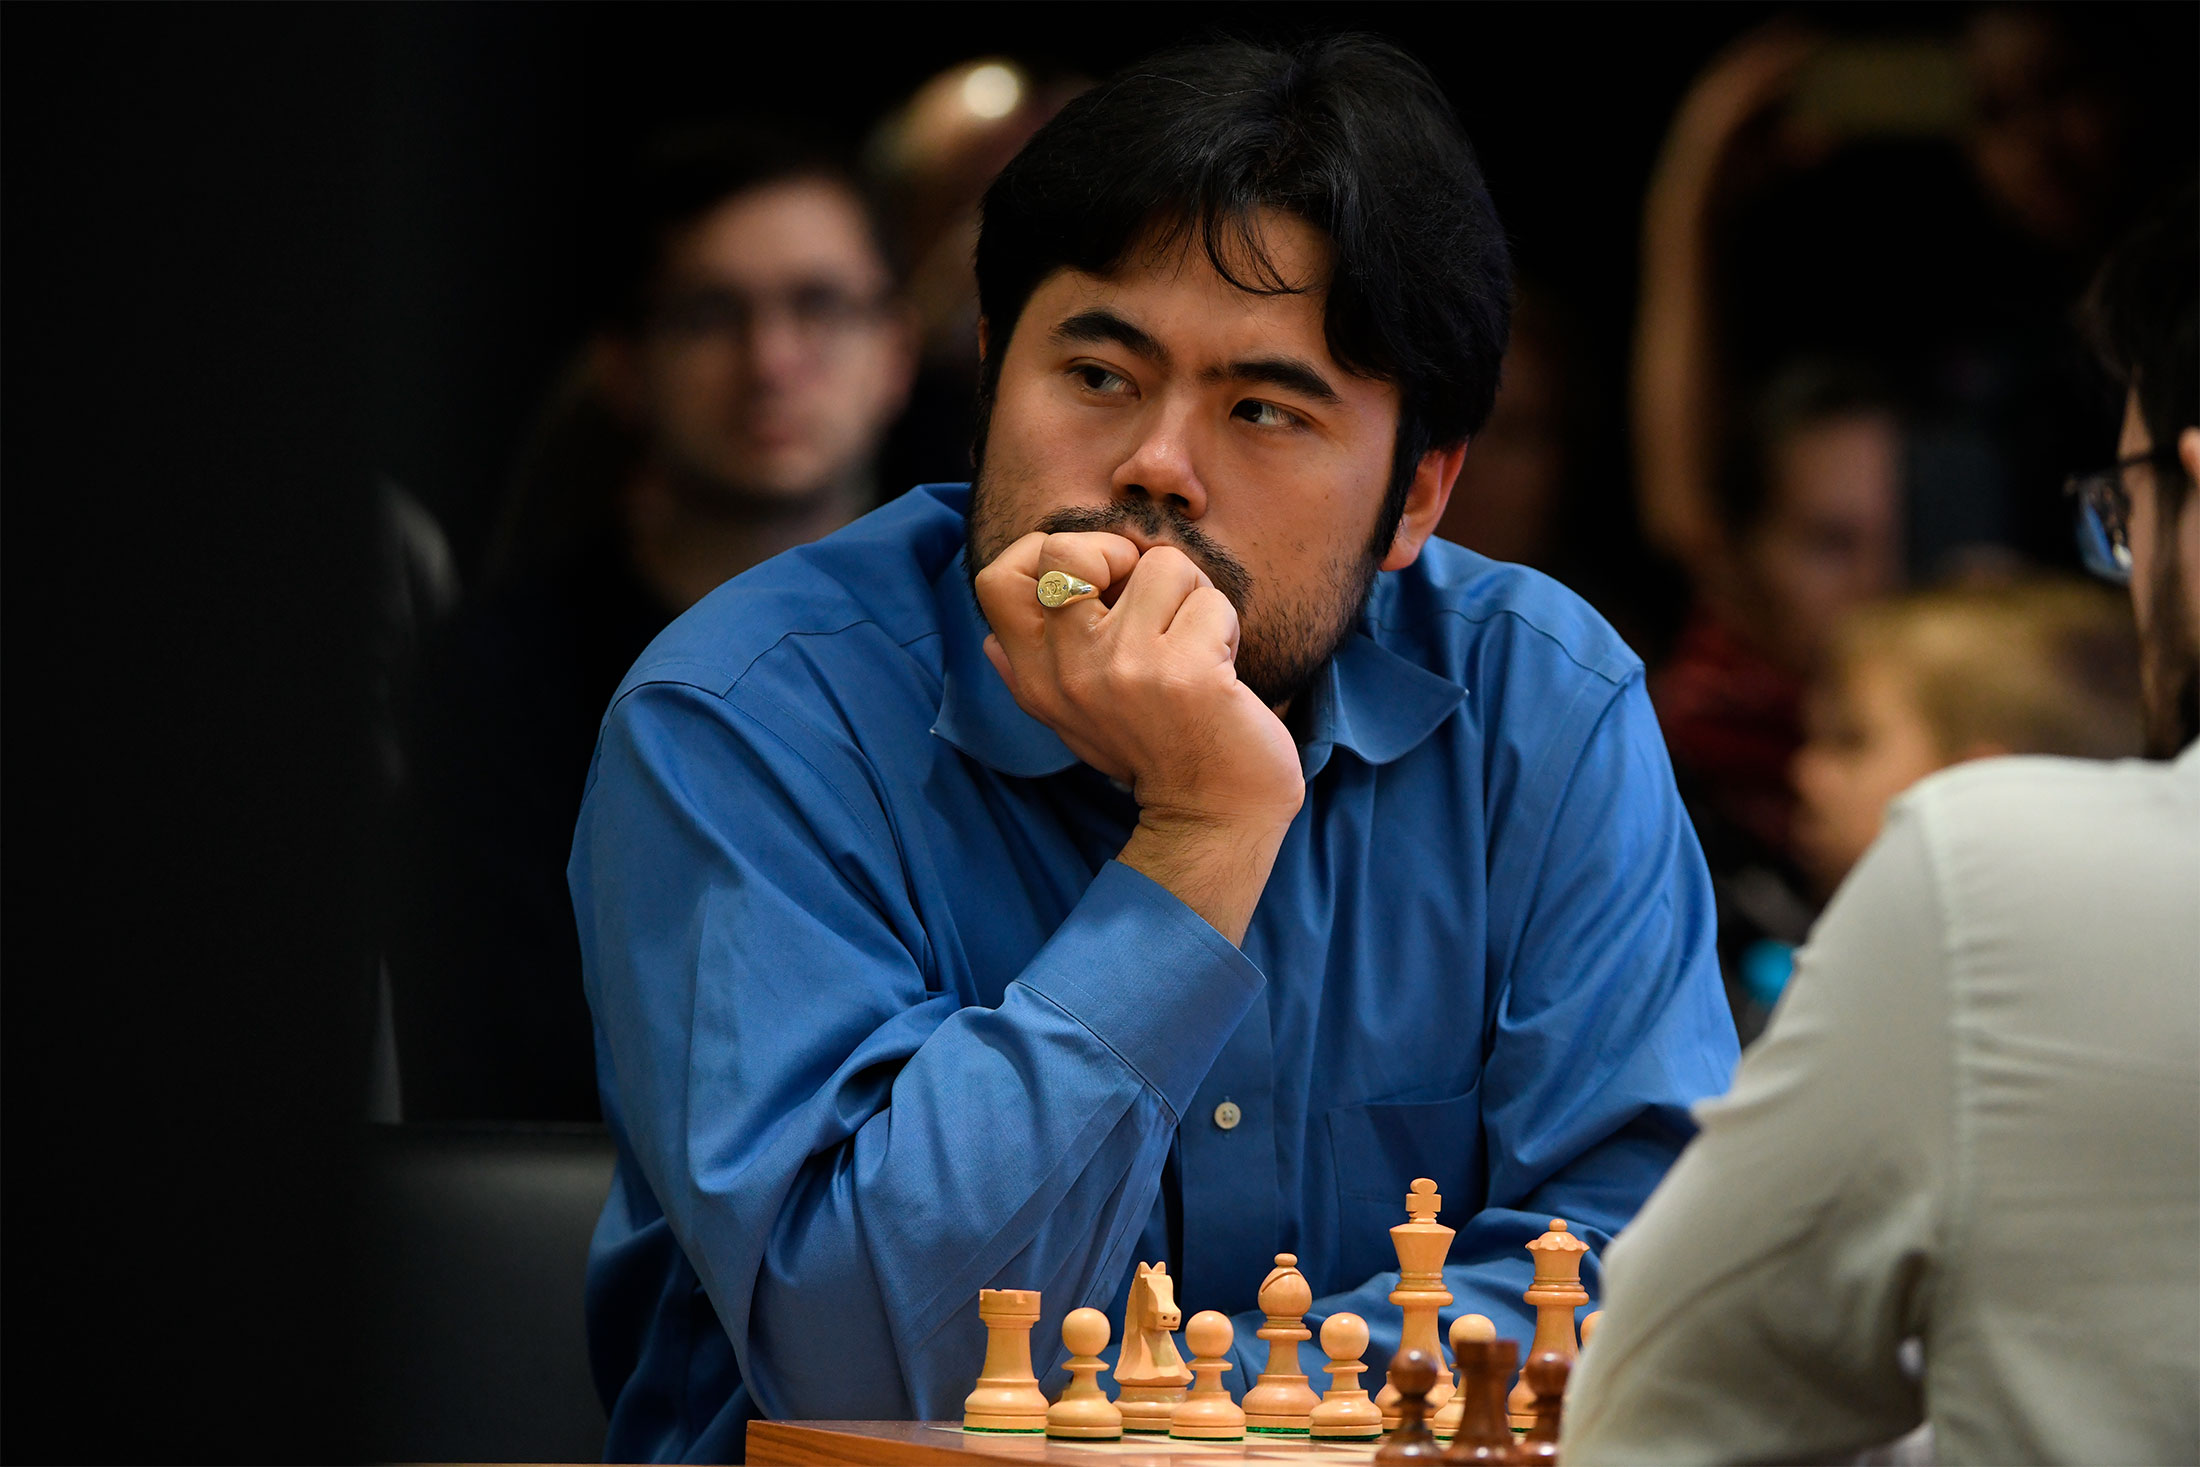 Hikaru Nakamura Defeats His Wife In Title Tuesday !!! #chess